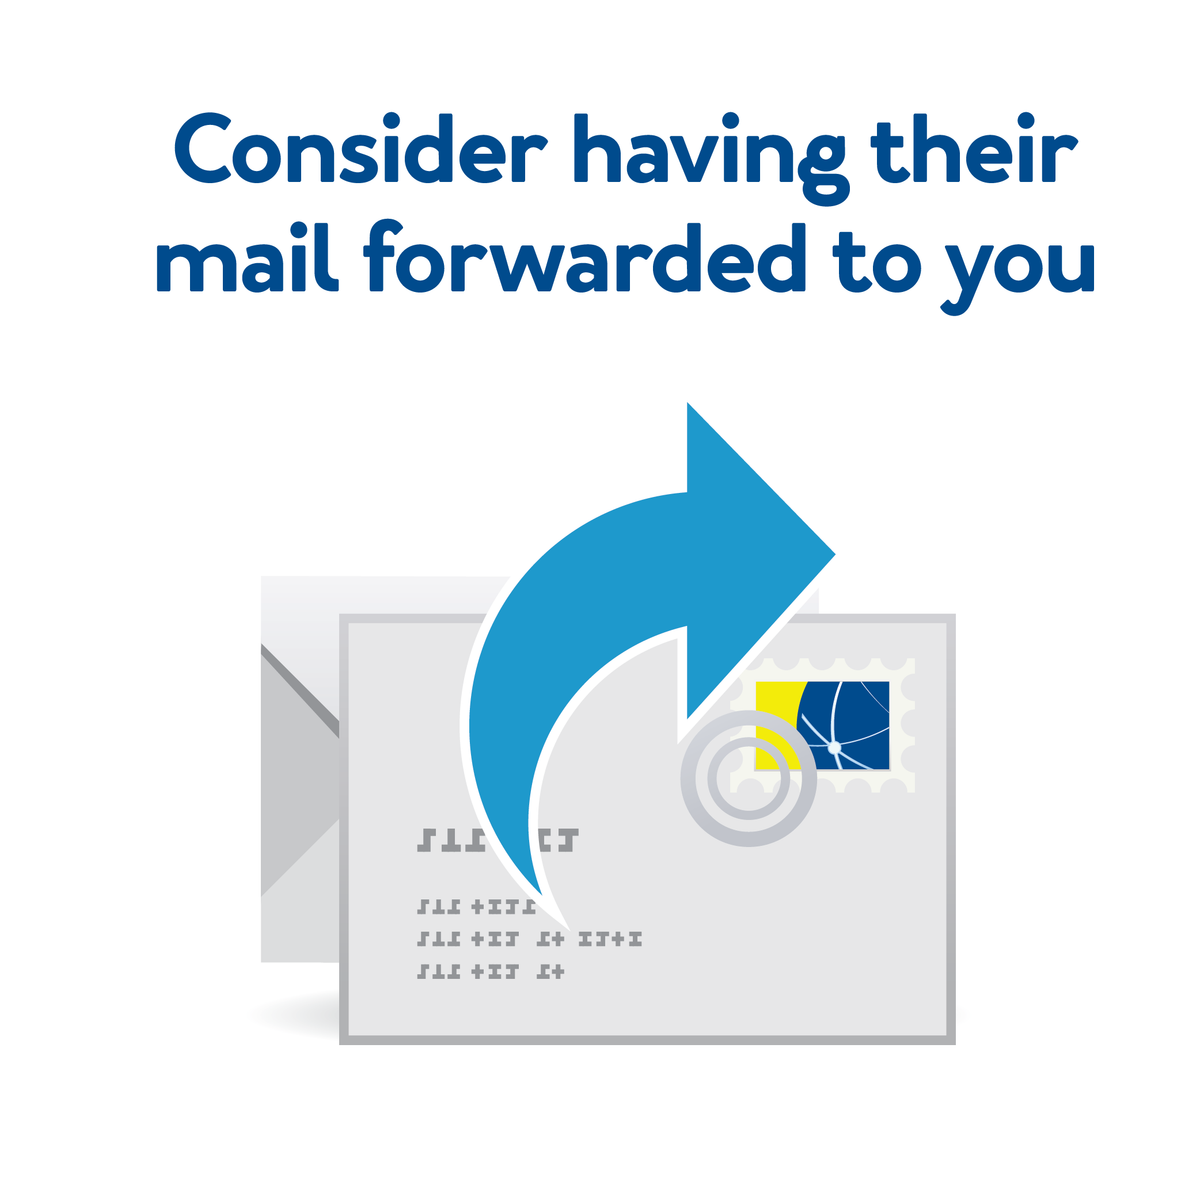 A cartoon envelope. Text, “Consider having their mail forwarded to you”